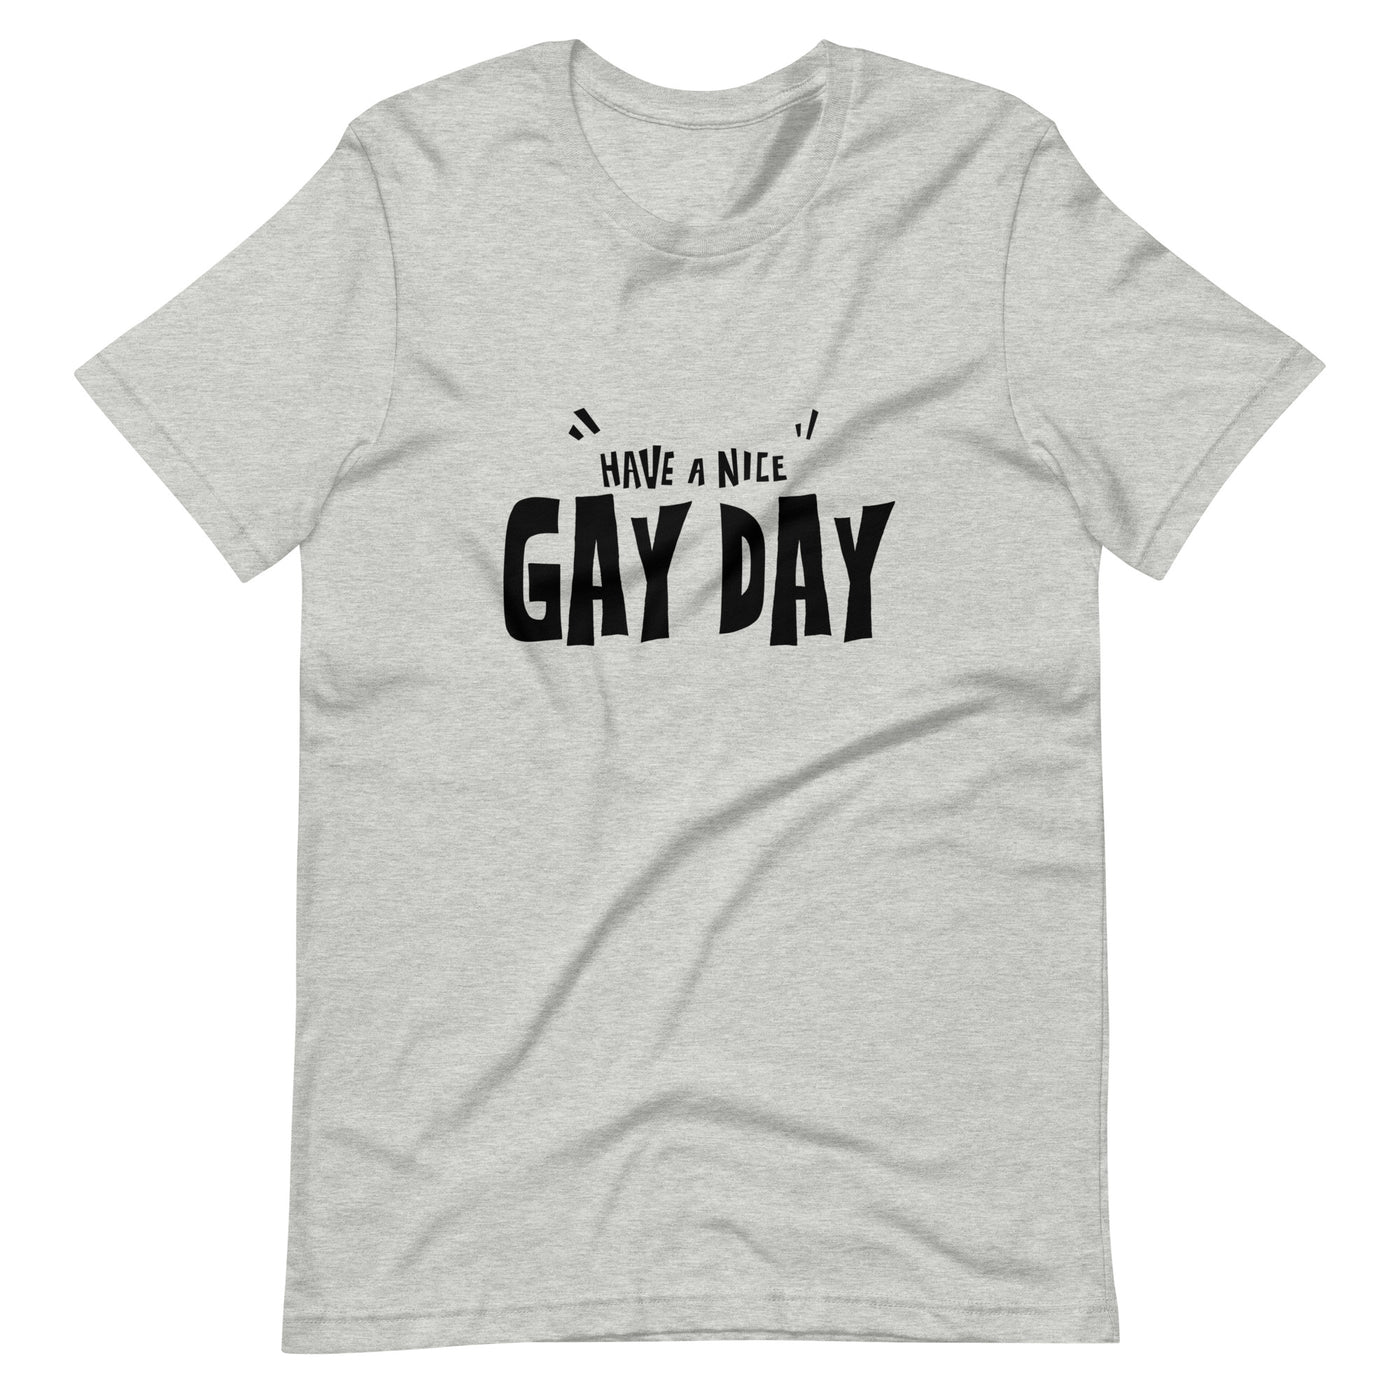 Pride Clothes - Live Out Loud Have a Nice Gay Day Pride Things TShirt - Athletic Heather